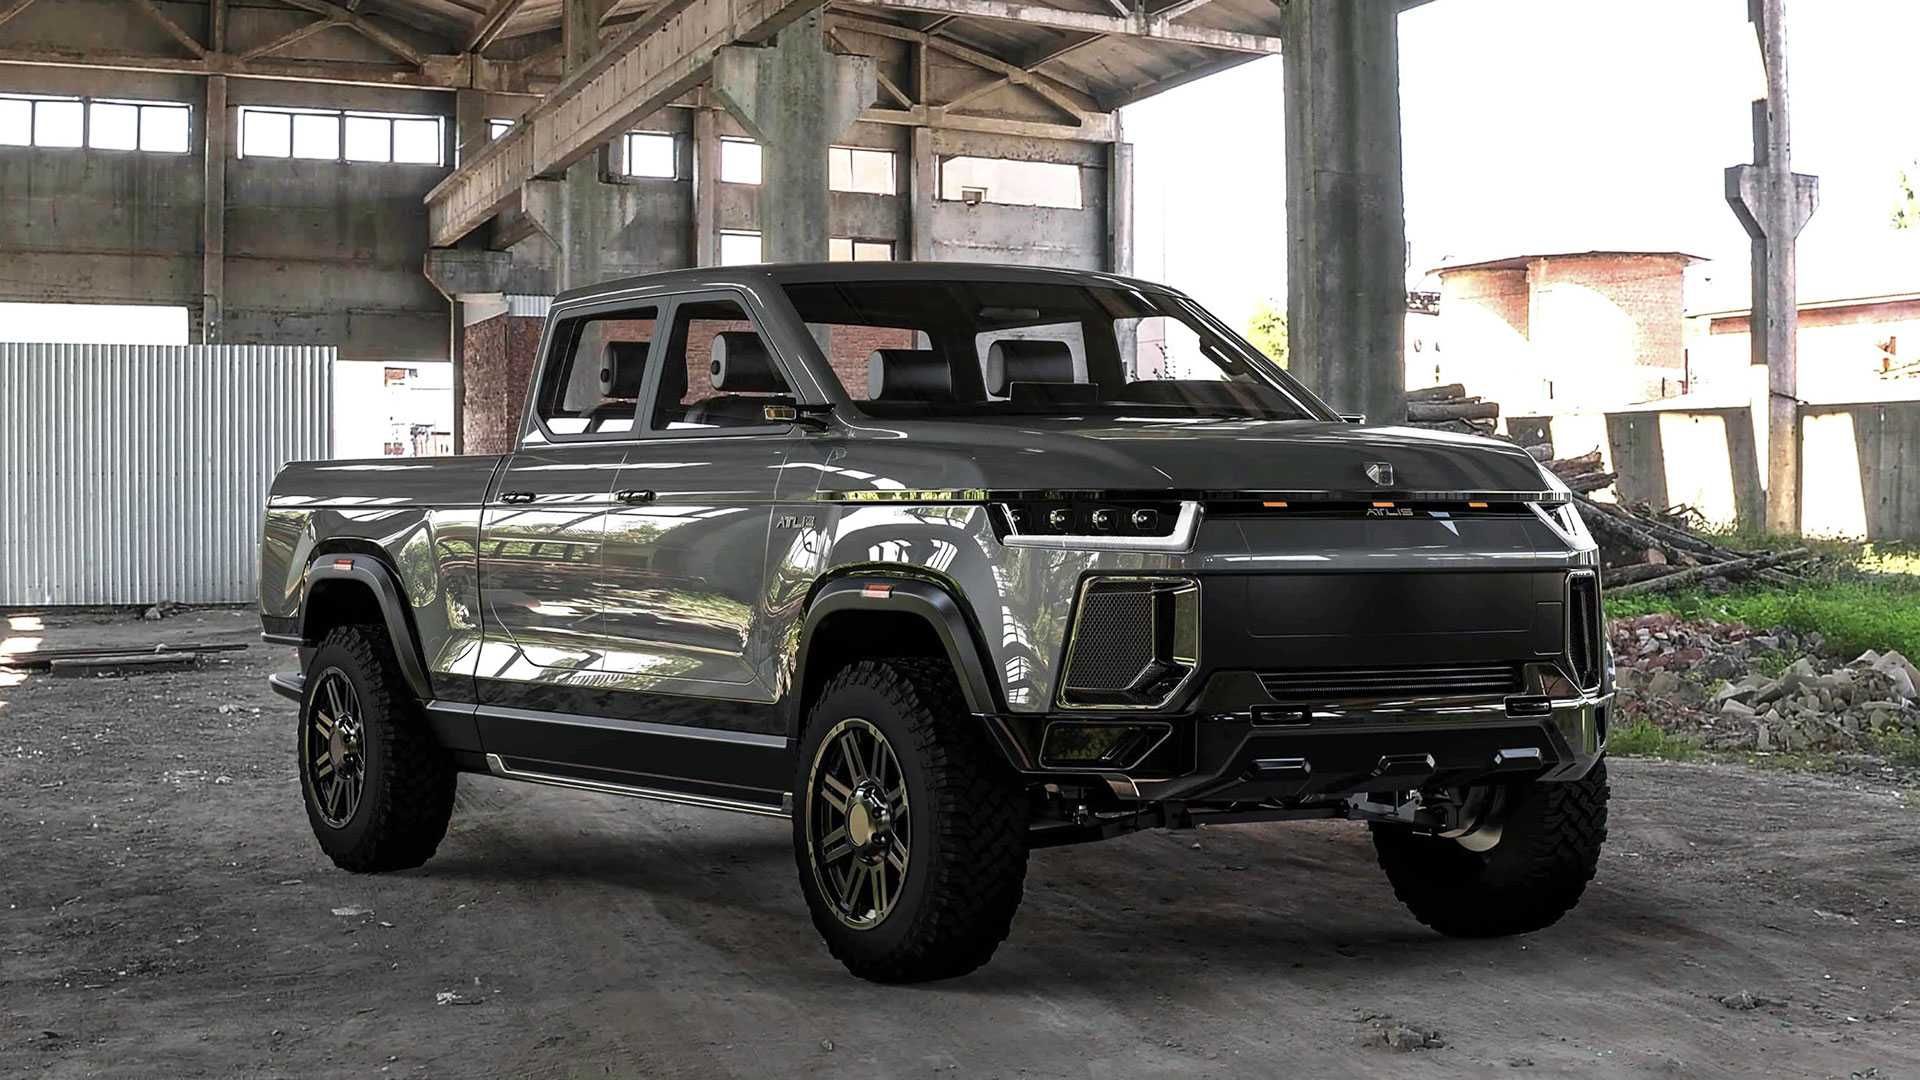 rivian-r1t-is-a-real-electric-pickup-truck-but-atlis-xt-is-not